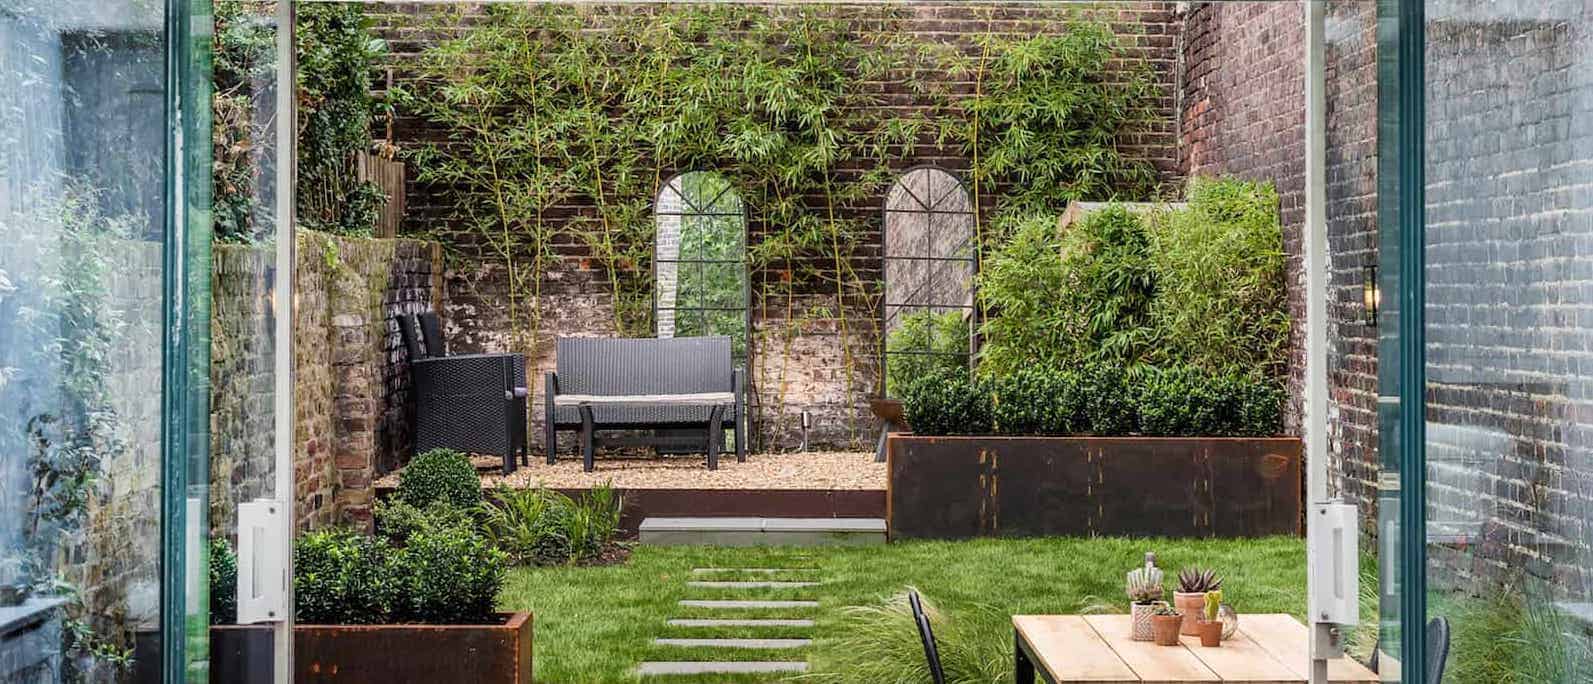 garden design and build company london image